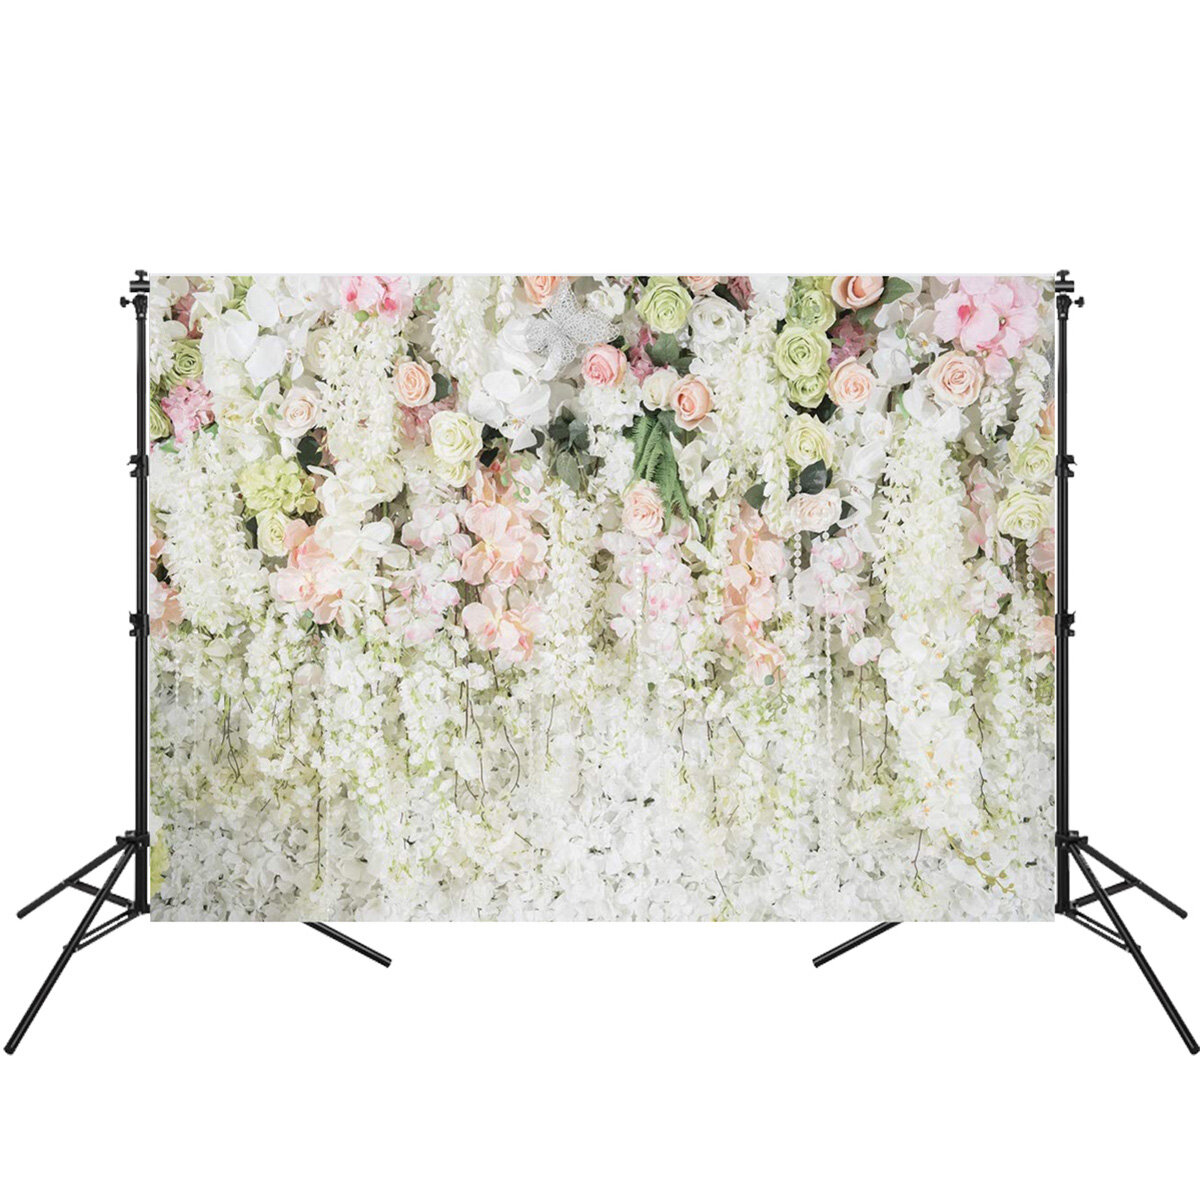 0.9x1.5m 1.5x2.1m 1.8x2.7m White Flowers Sea Photography Studio Wall Backdrop Photo Background Cloth for Birthday Weddin, Banggood  - buy with discount